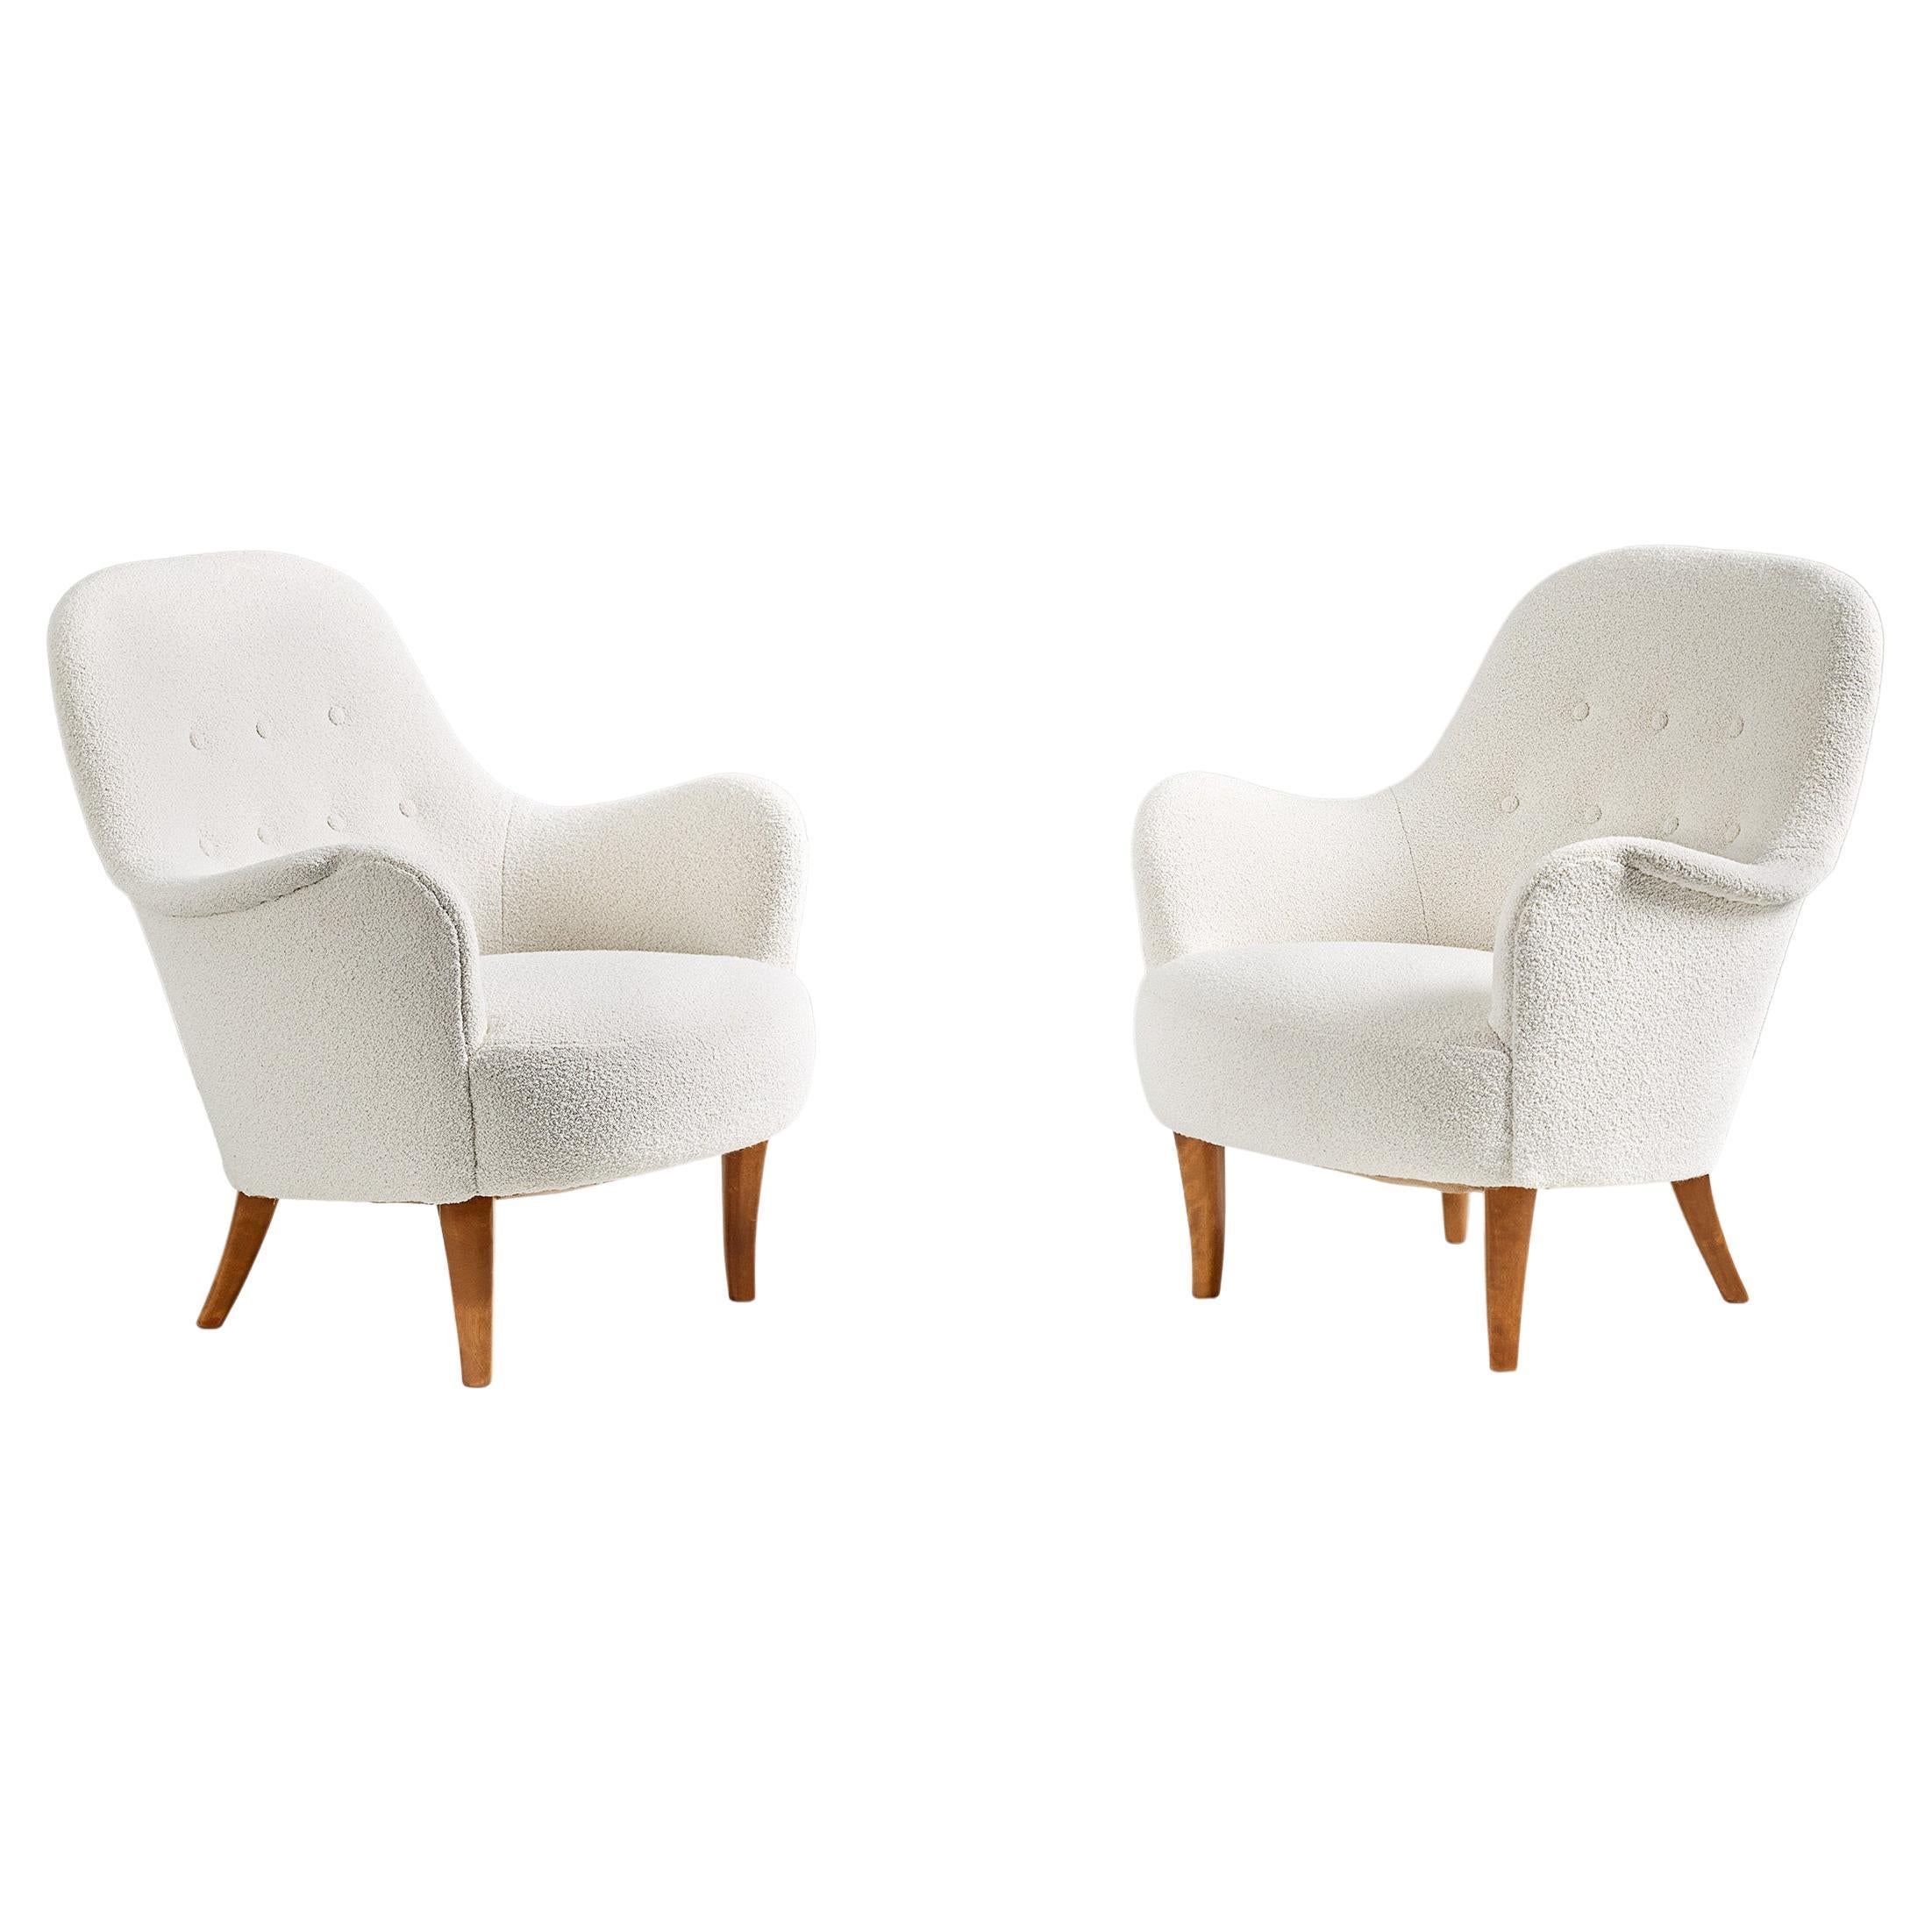 Pair of Cirkus Armchairs by Carl Malmsten, 1950s For Sale